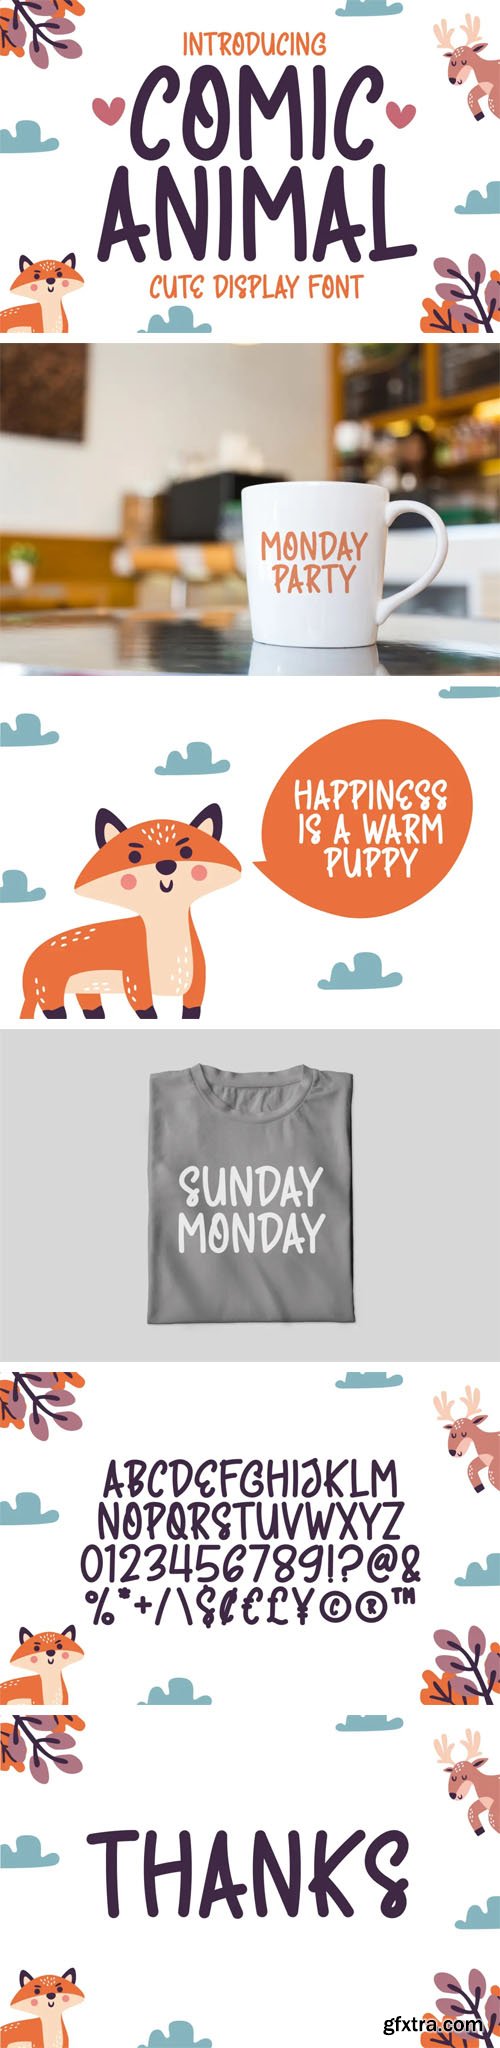 Comic Animal - Quirky & Cute Display Font